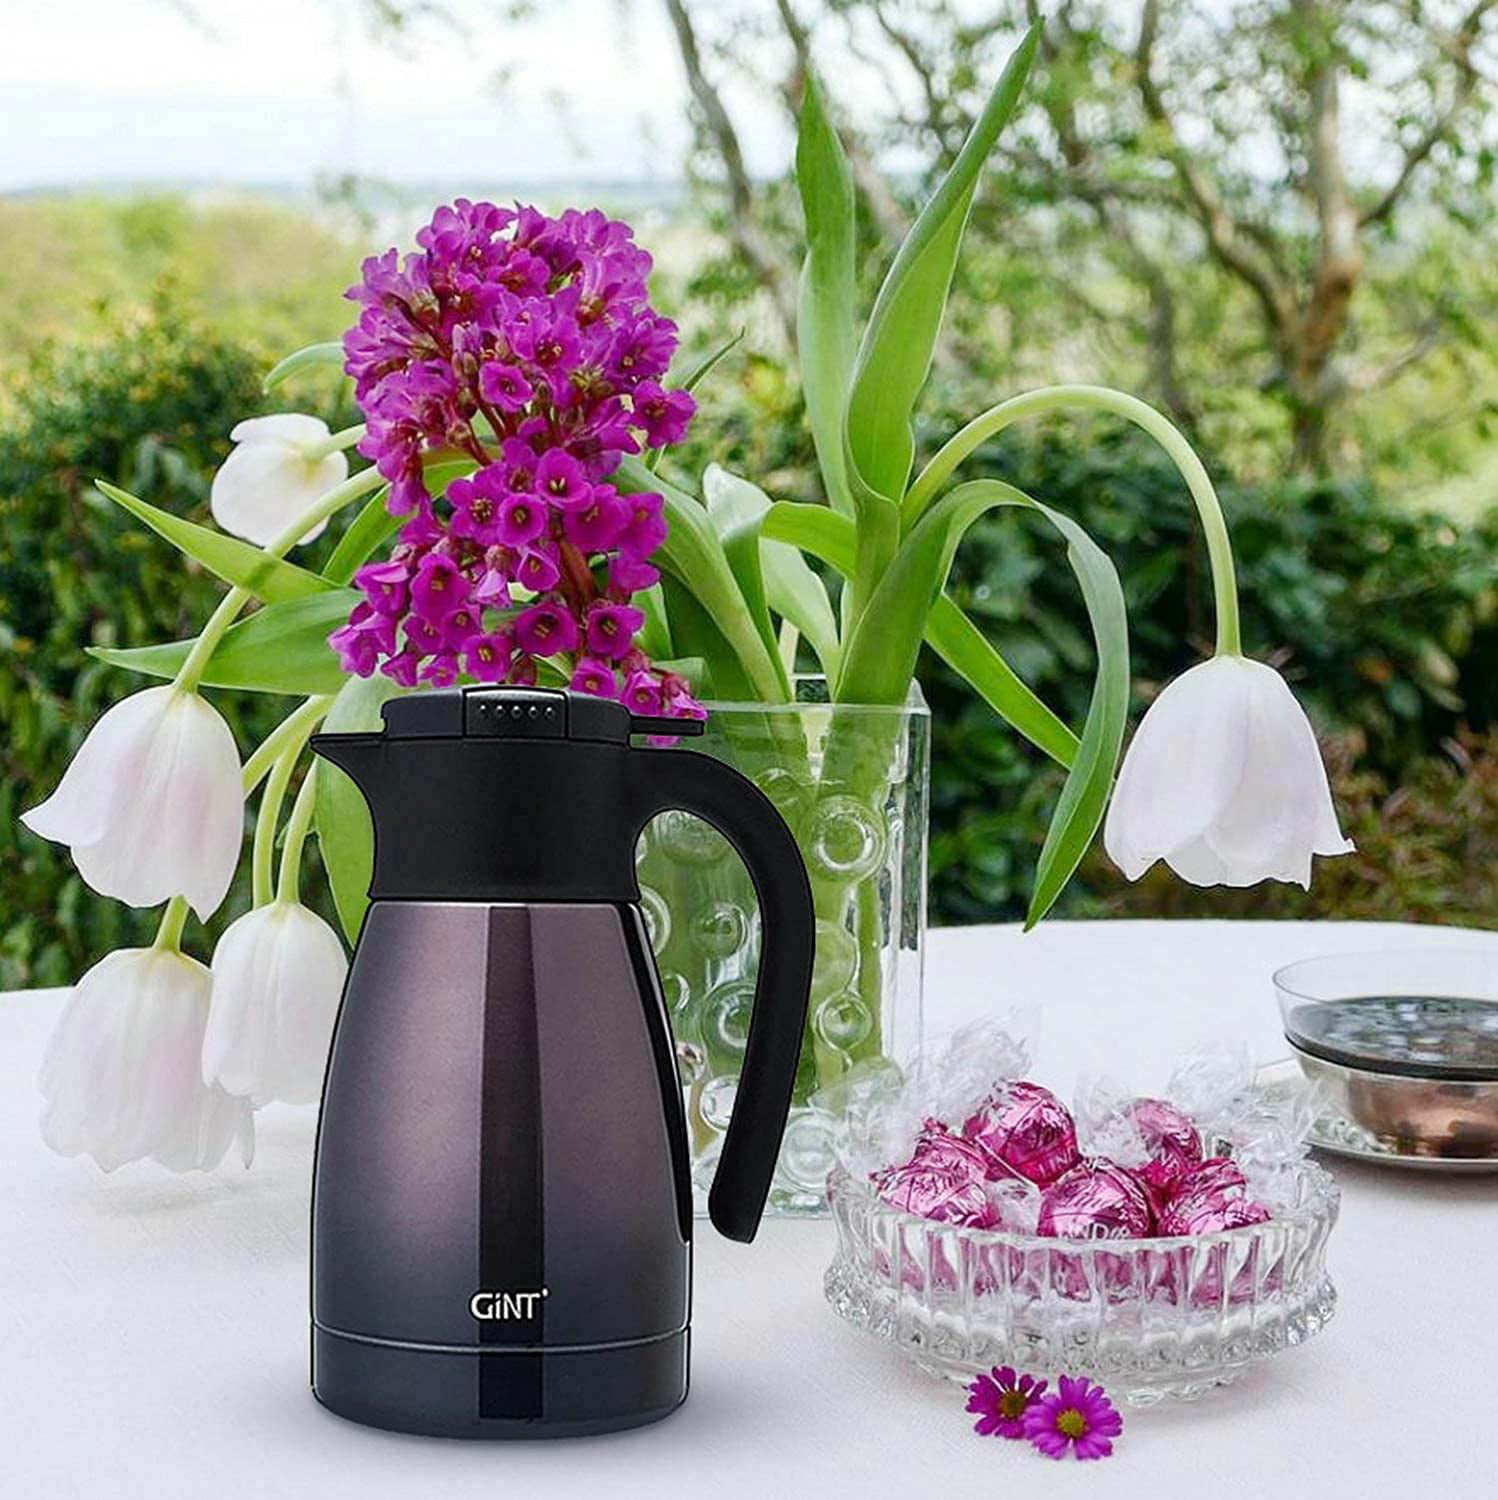 Janine Thermal Carafe: Stylish, Heat Retaining & Easy to Clean